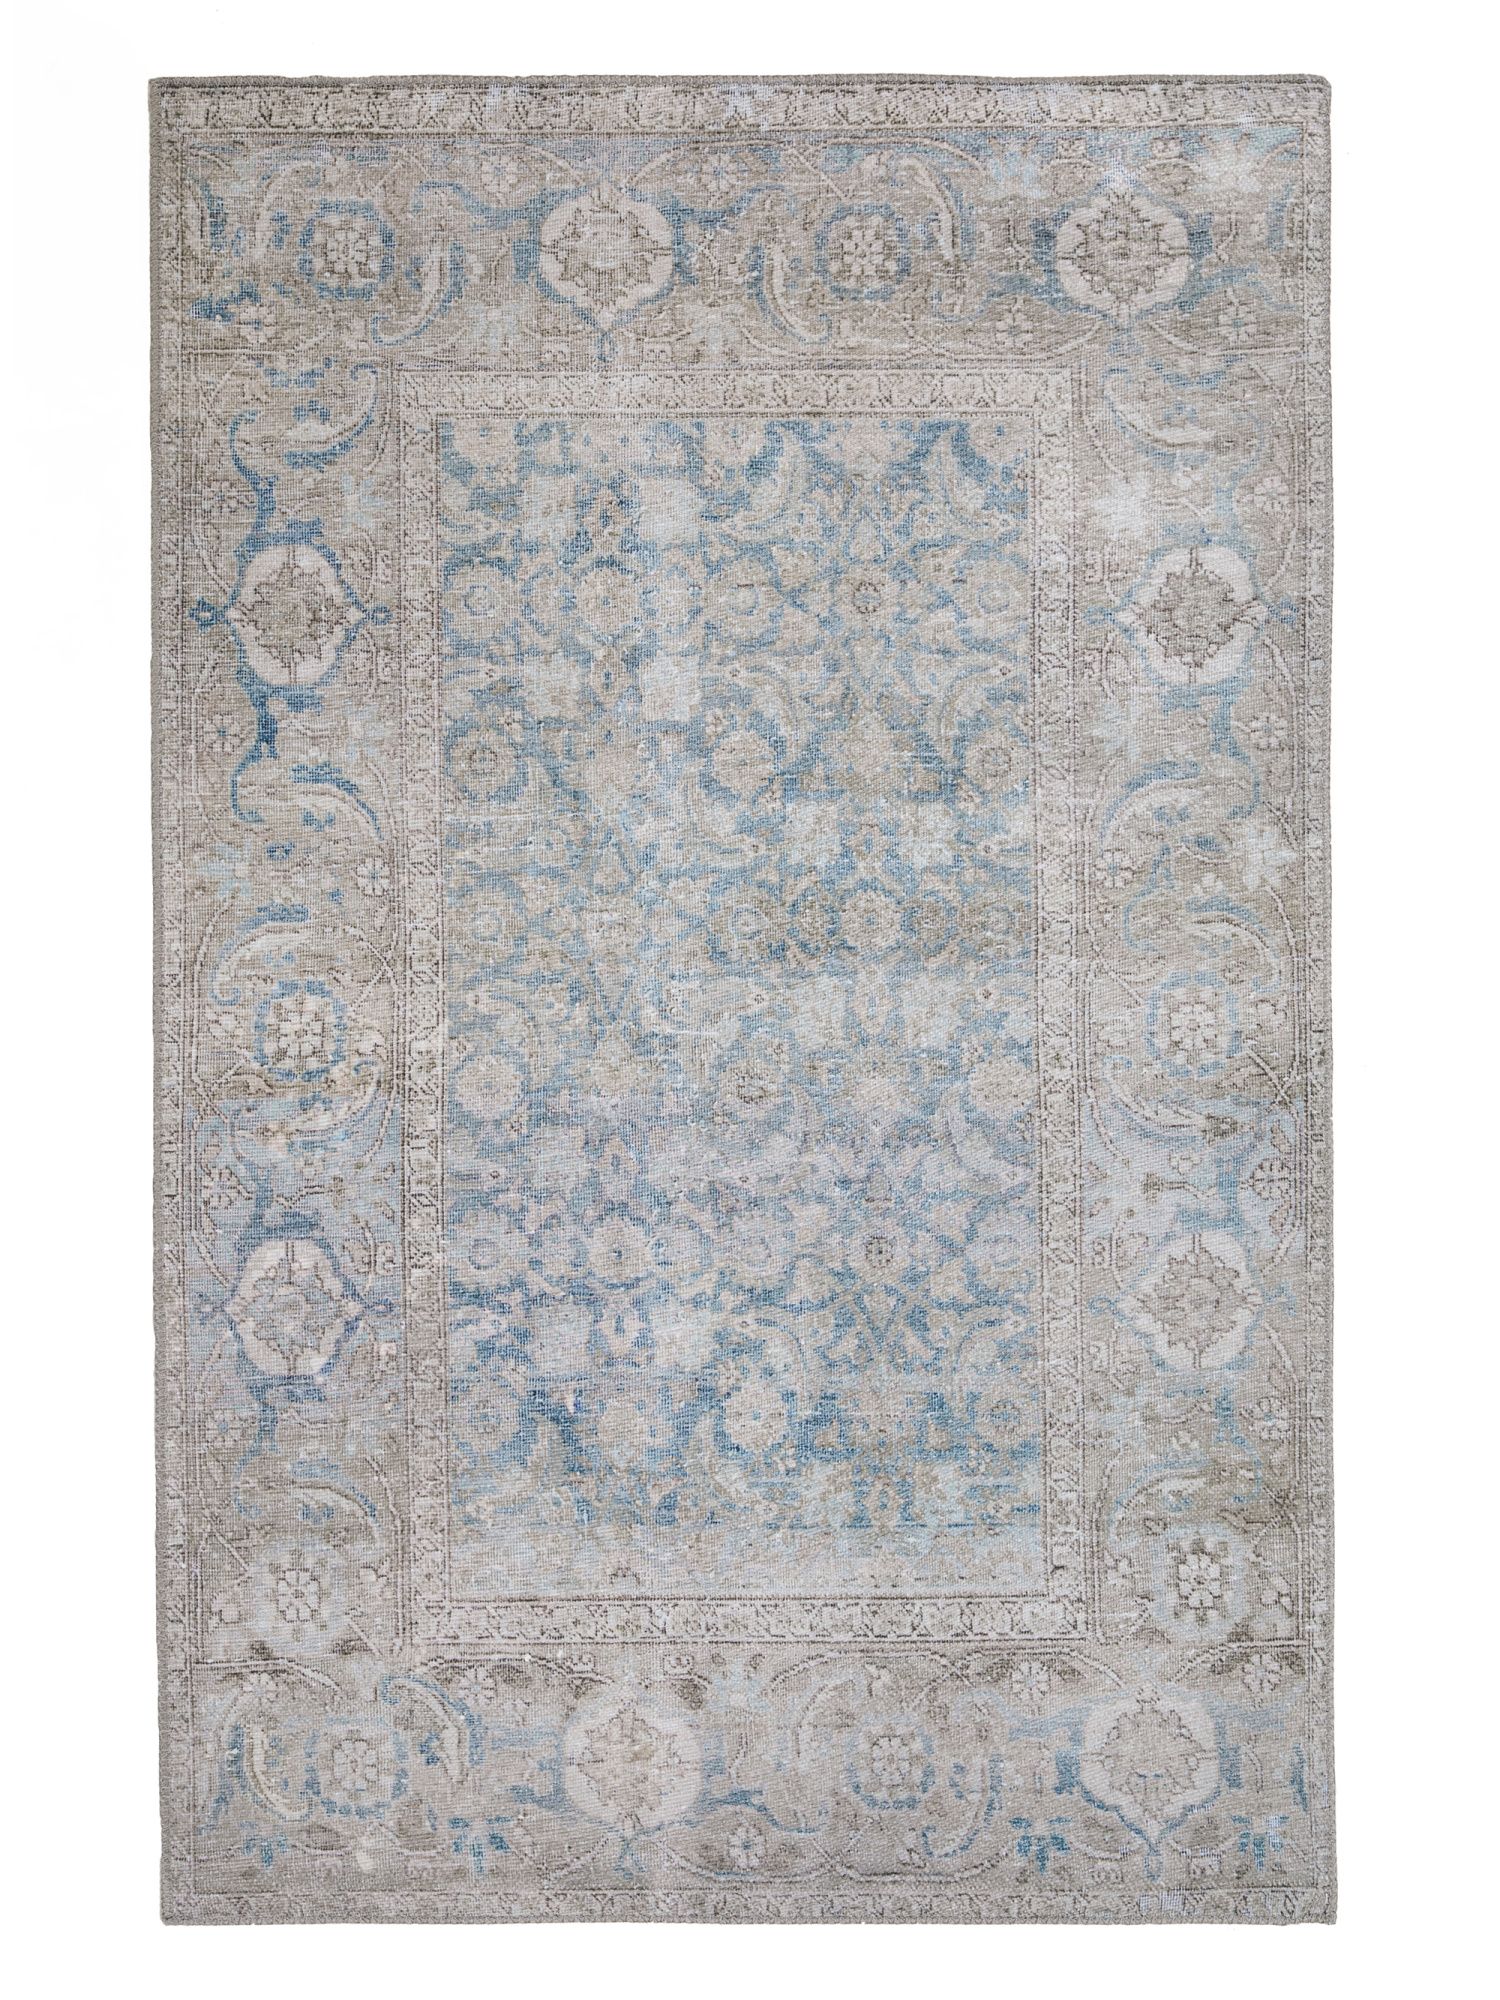 Made In Egypt Flat Weave Area Rug | Marshalls